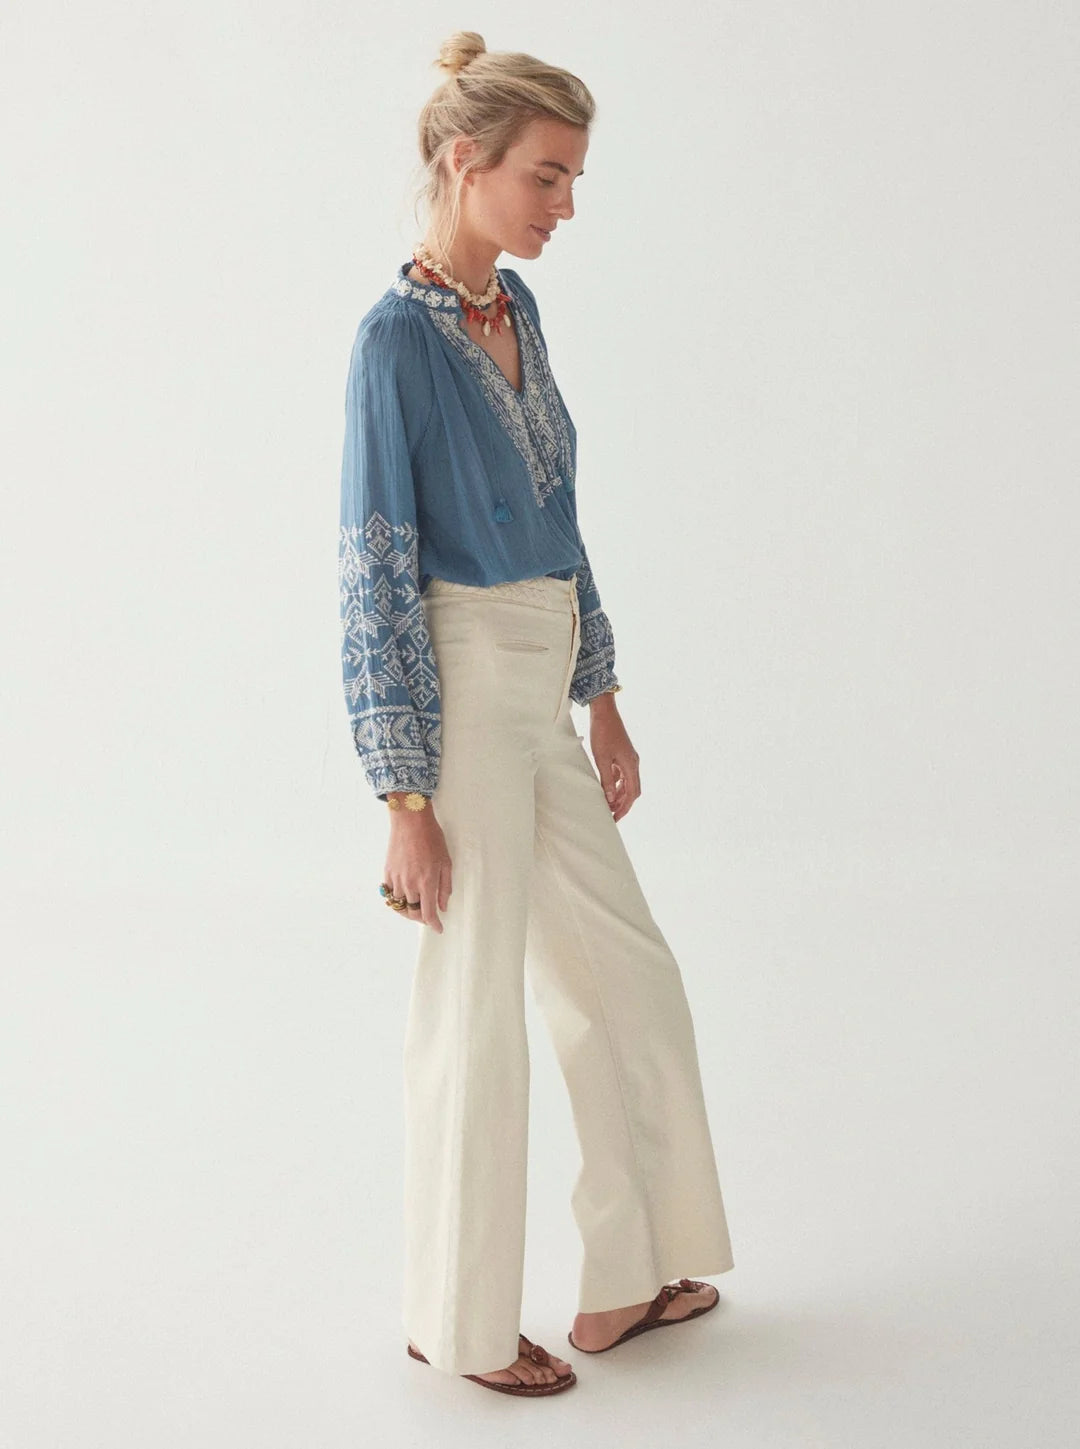 model wears blue blouse with off white embroidery